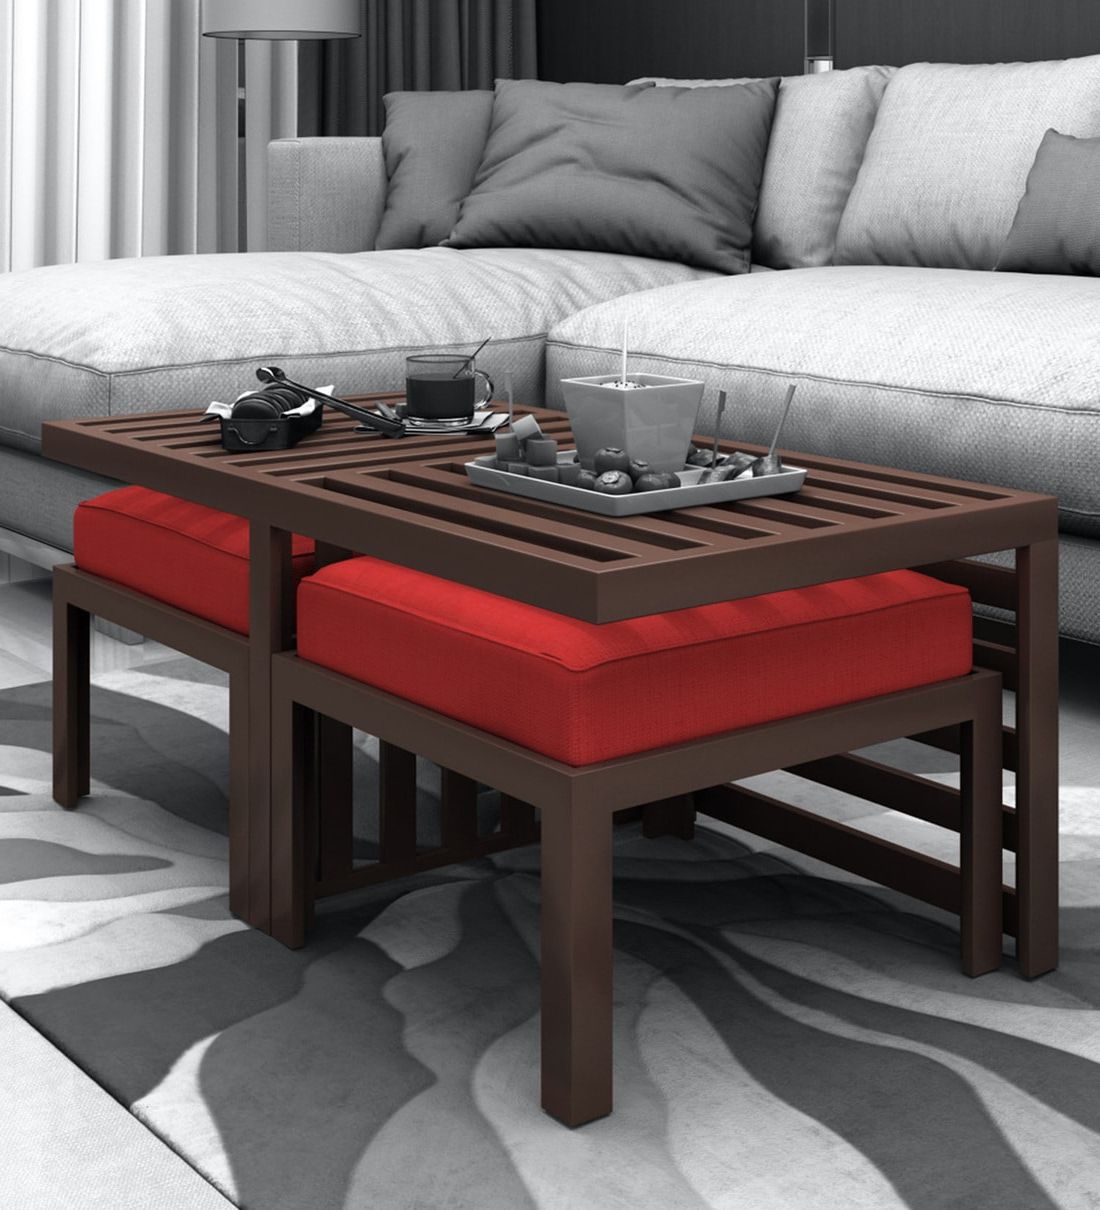 Widely Used Pecan Brown Triangular Coffee Tables Pertaining To Buy Trendy Coffee Table With 2 Red Cushioned Stools In (View 15 of 20)